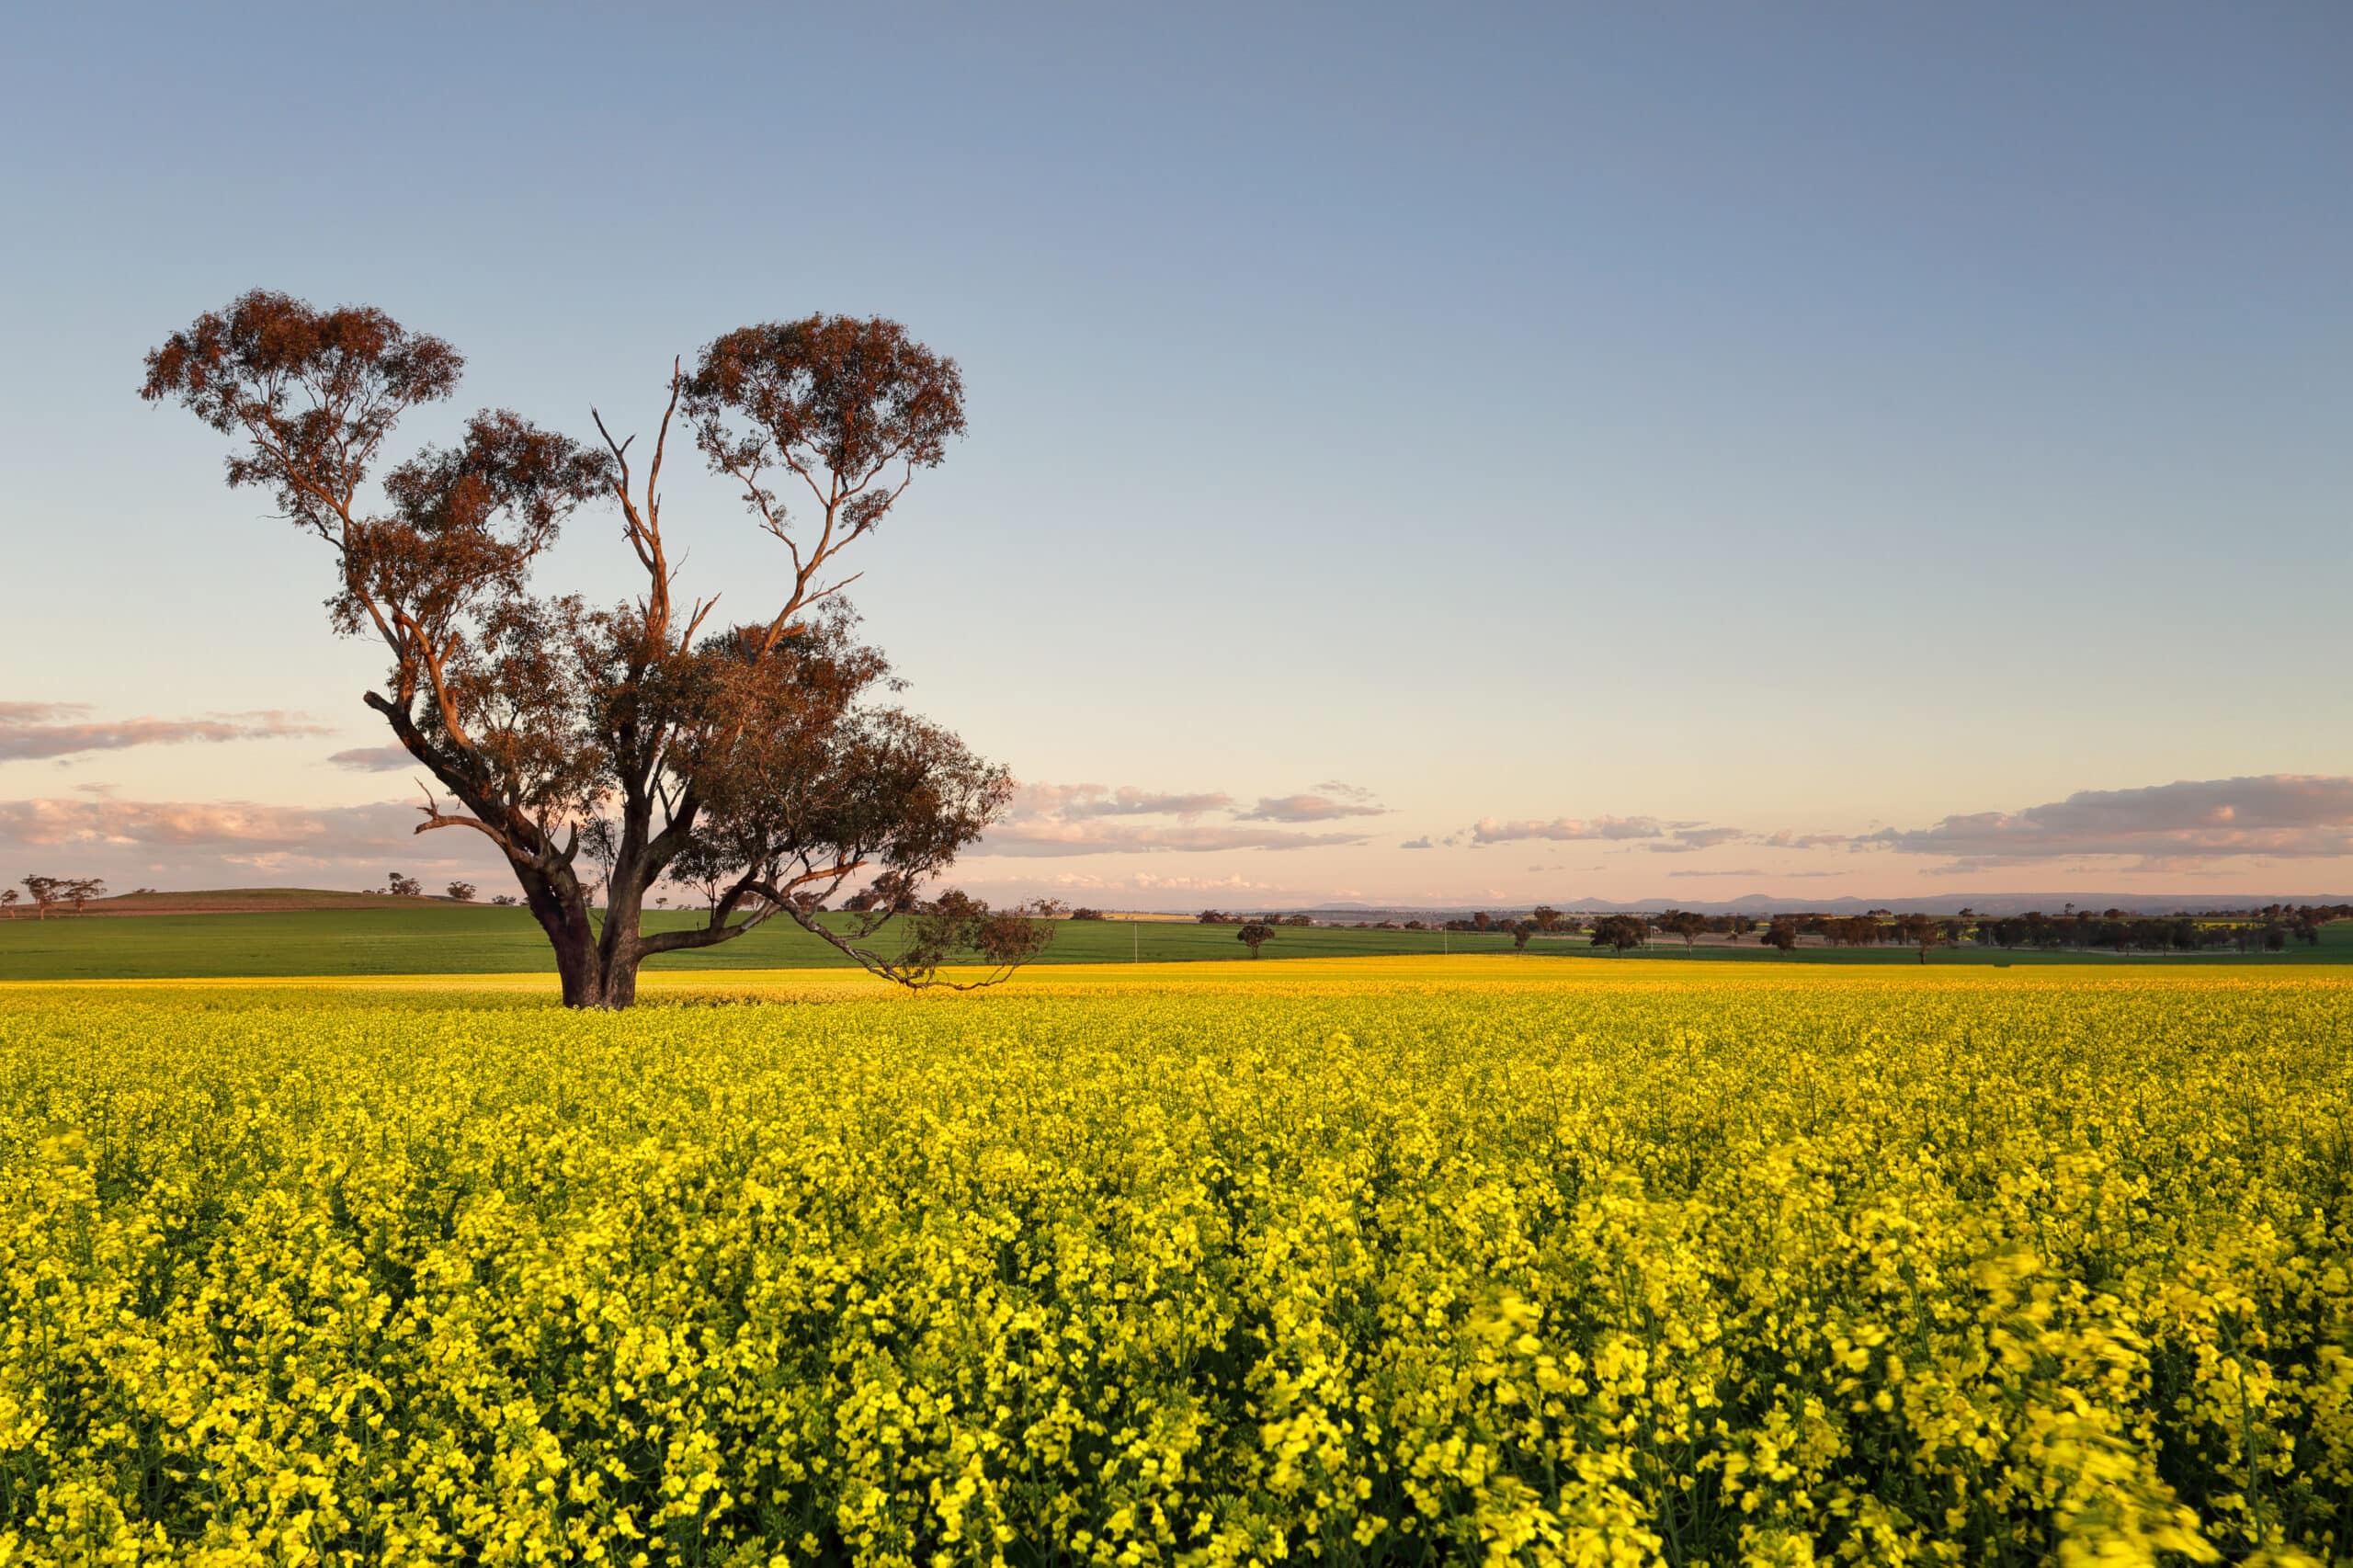 Golden flowering canola field at dusk. Focus to tree trunk.